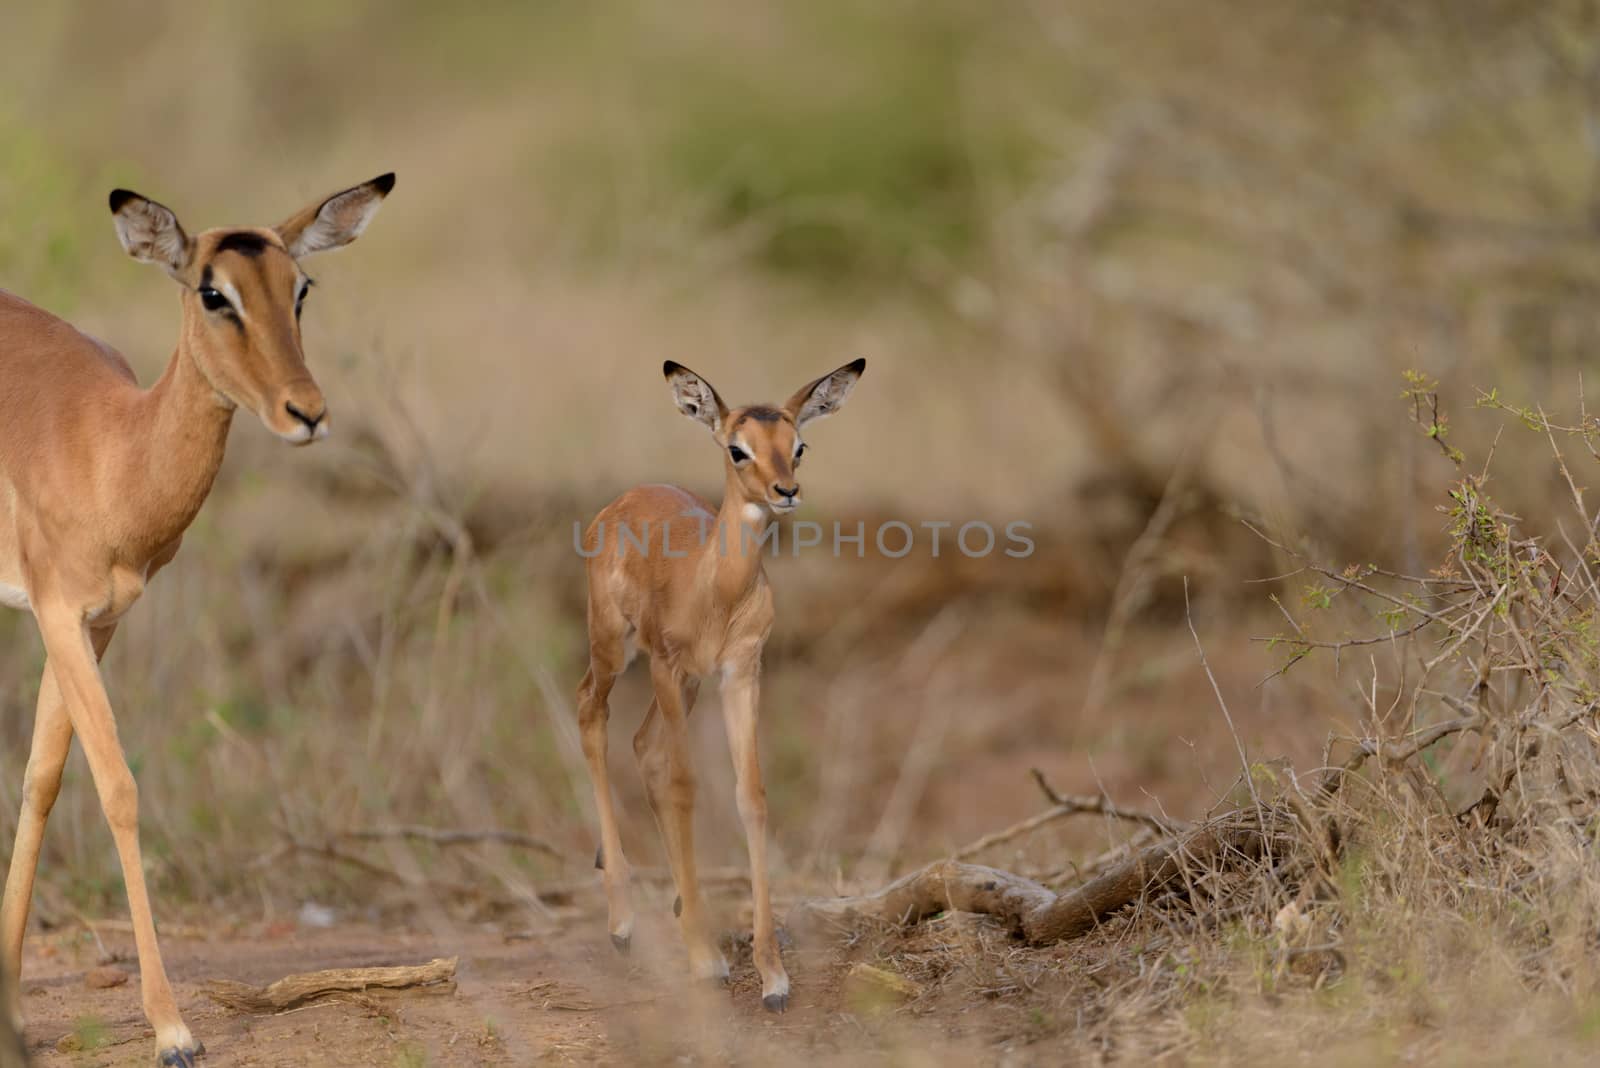 Impala calf, baby impala antelope in the wilderness of Africa